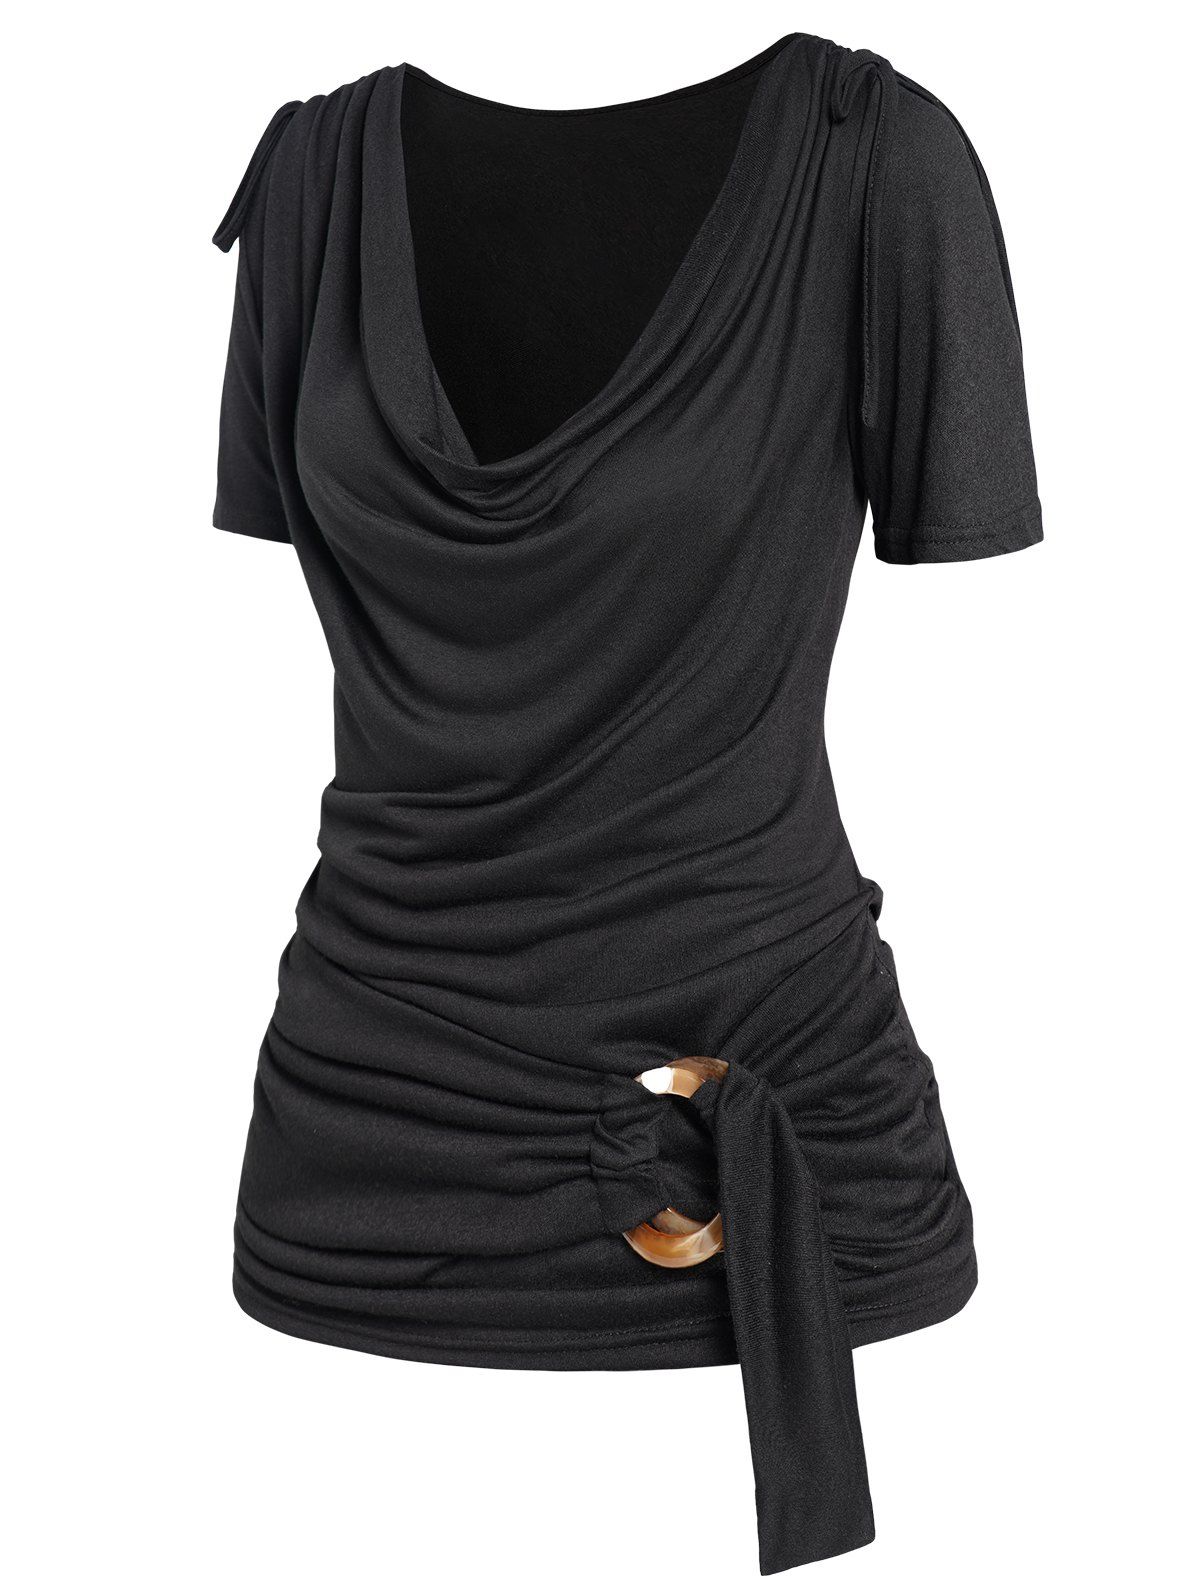 Draped T Shirt O Ring Plain Color Cowl Neck Cinched Shoulder Casual Tee - BLACK M